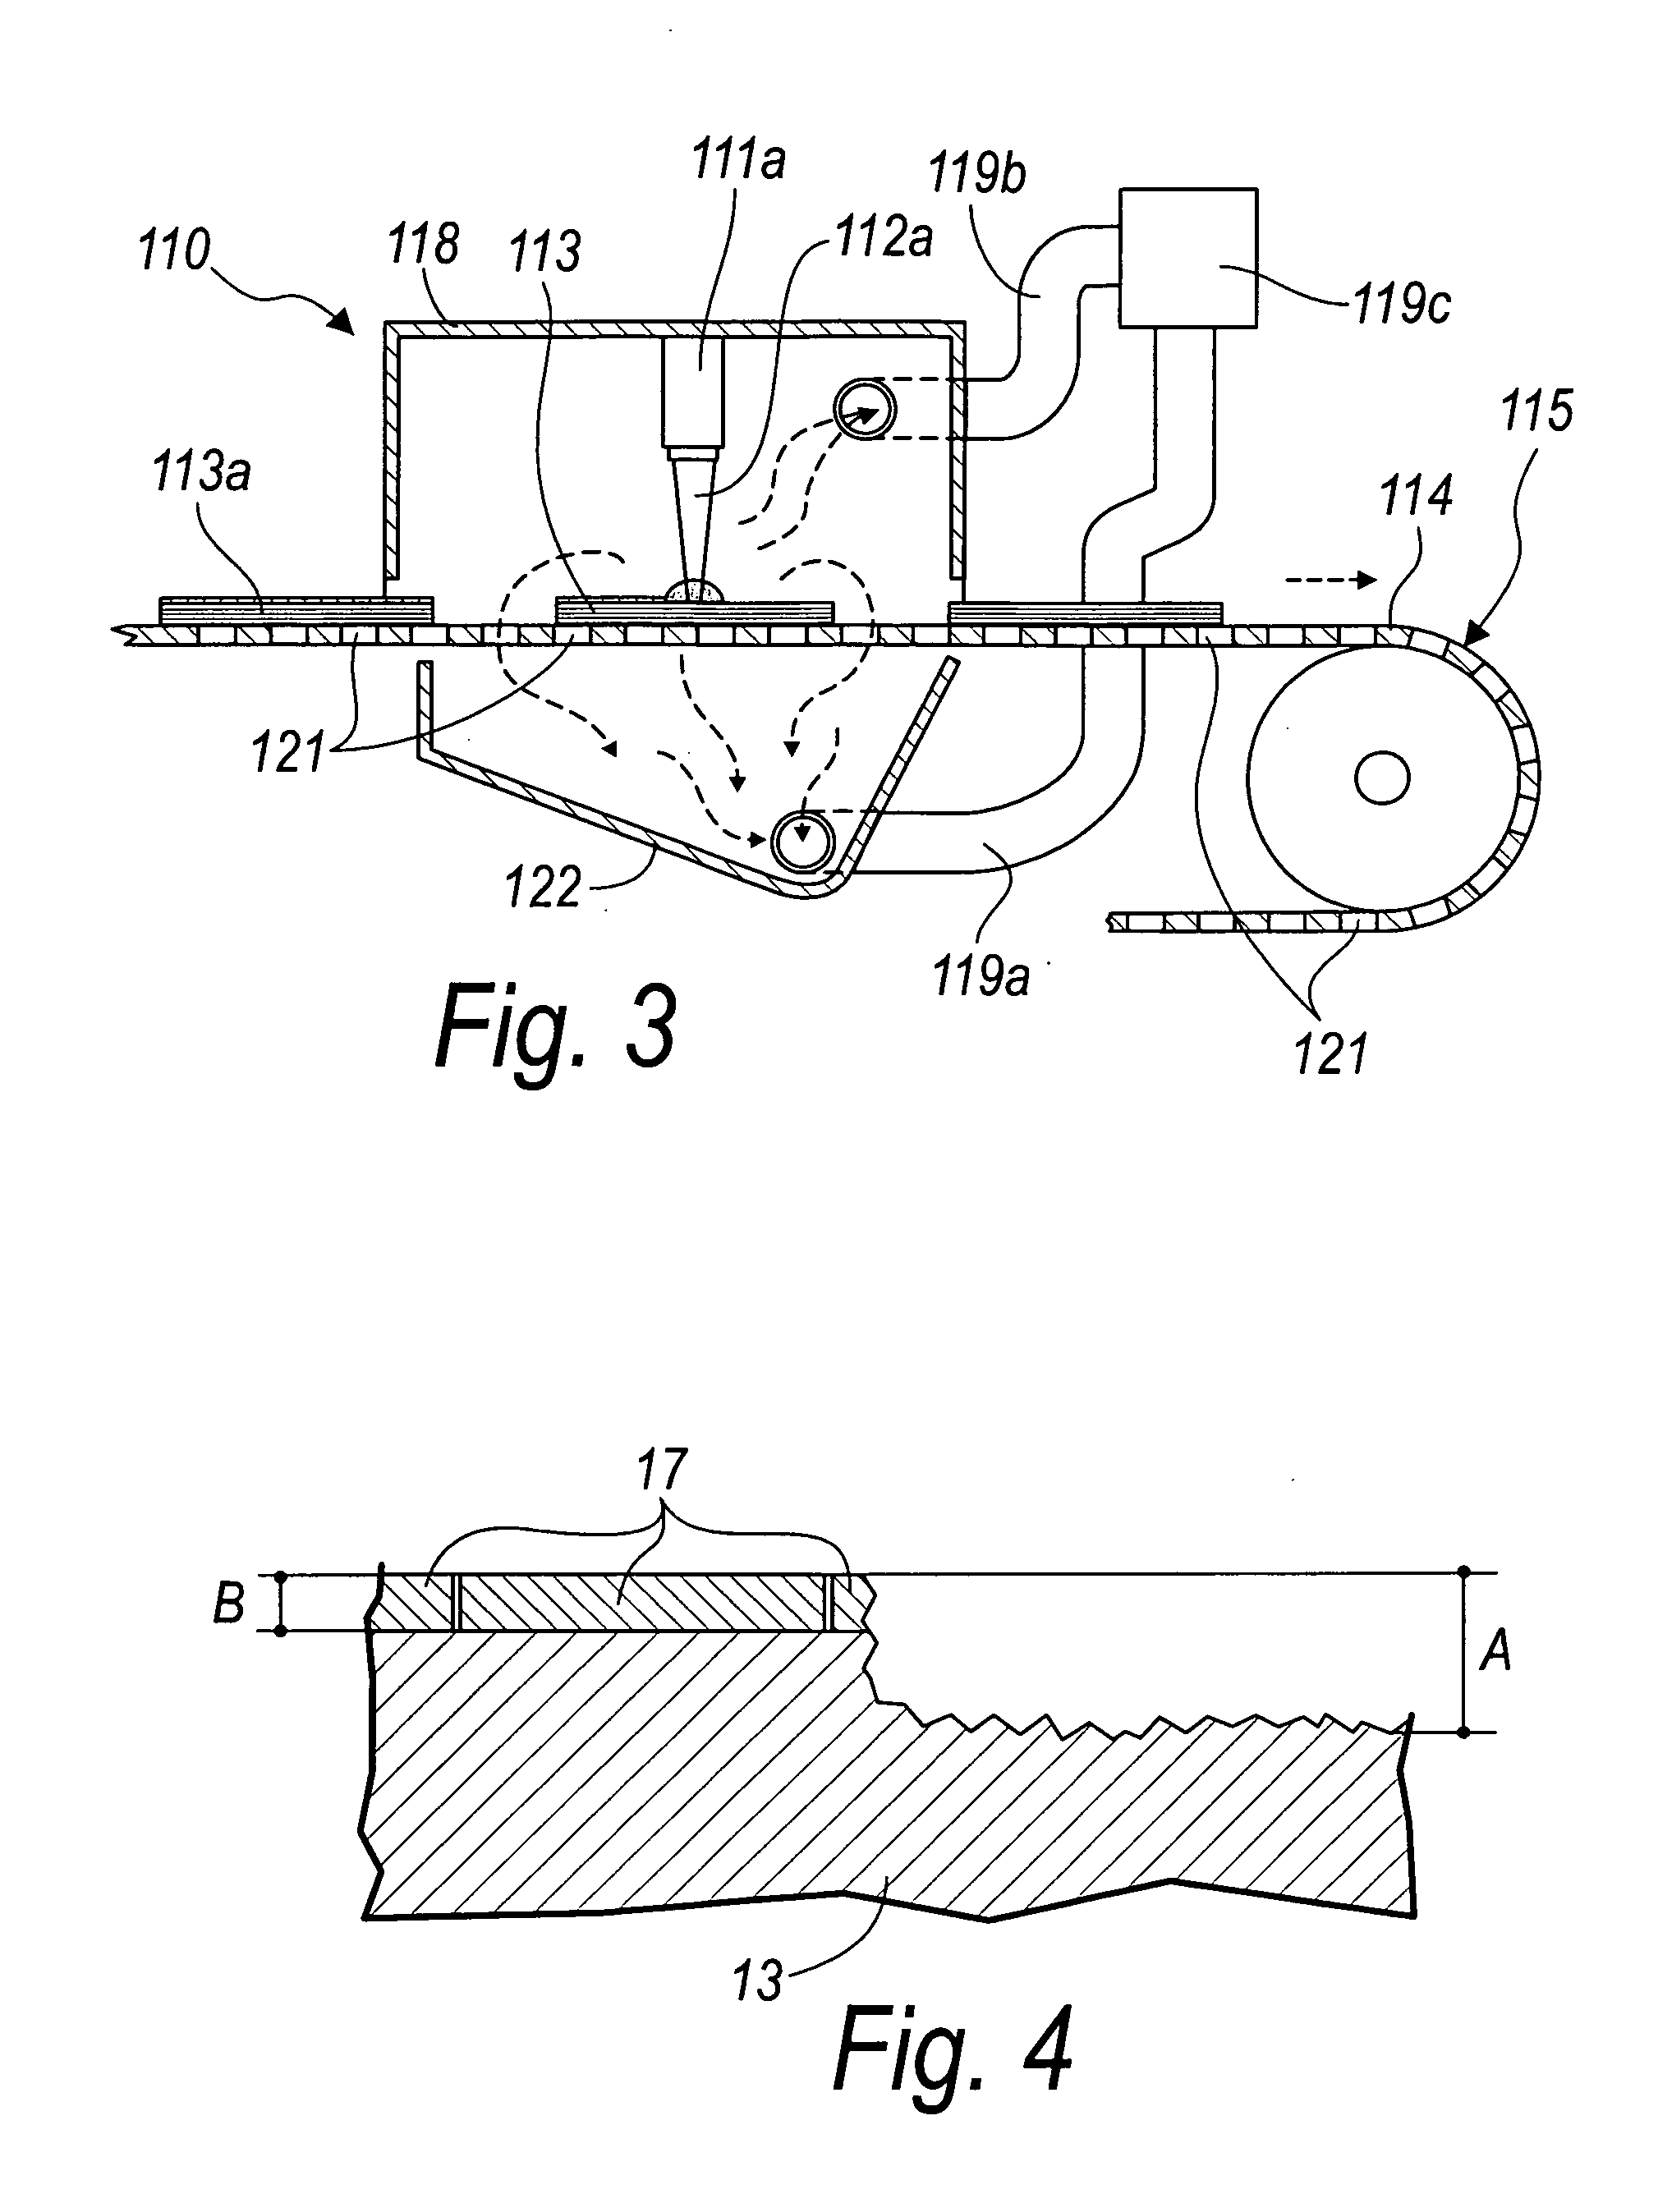 "Machine for removing surfaces of semiconductors and particularly surfaces with integrated circuits"